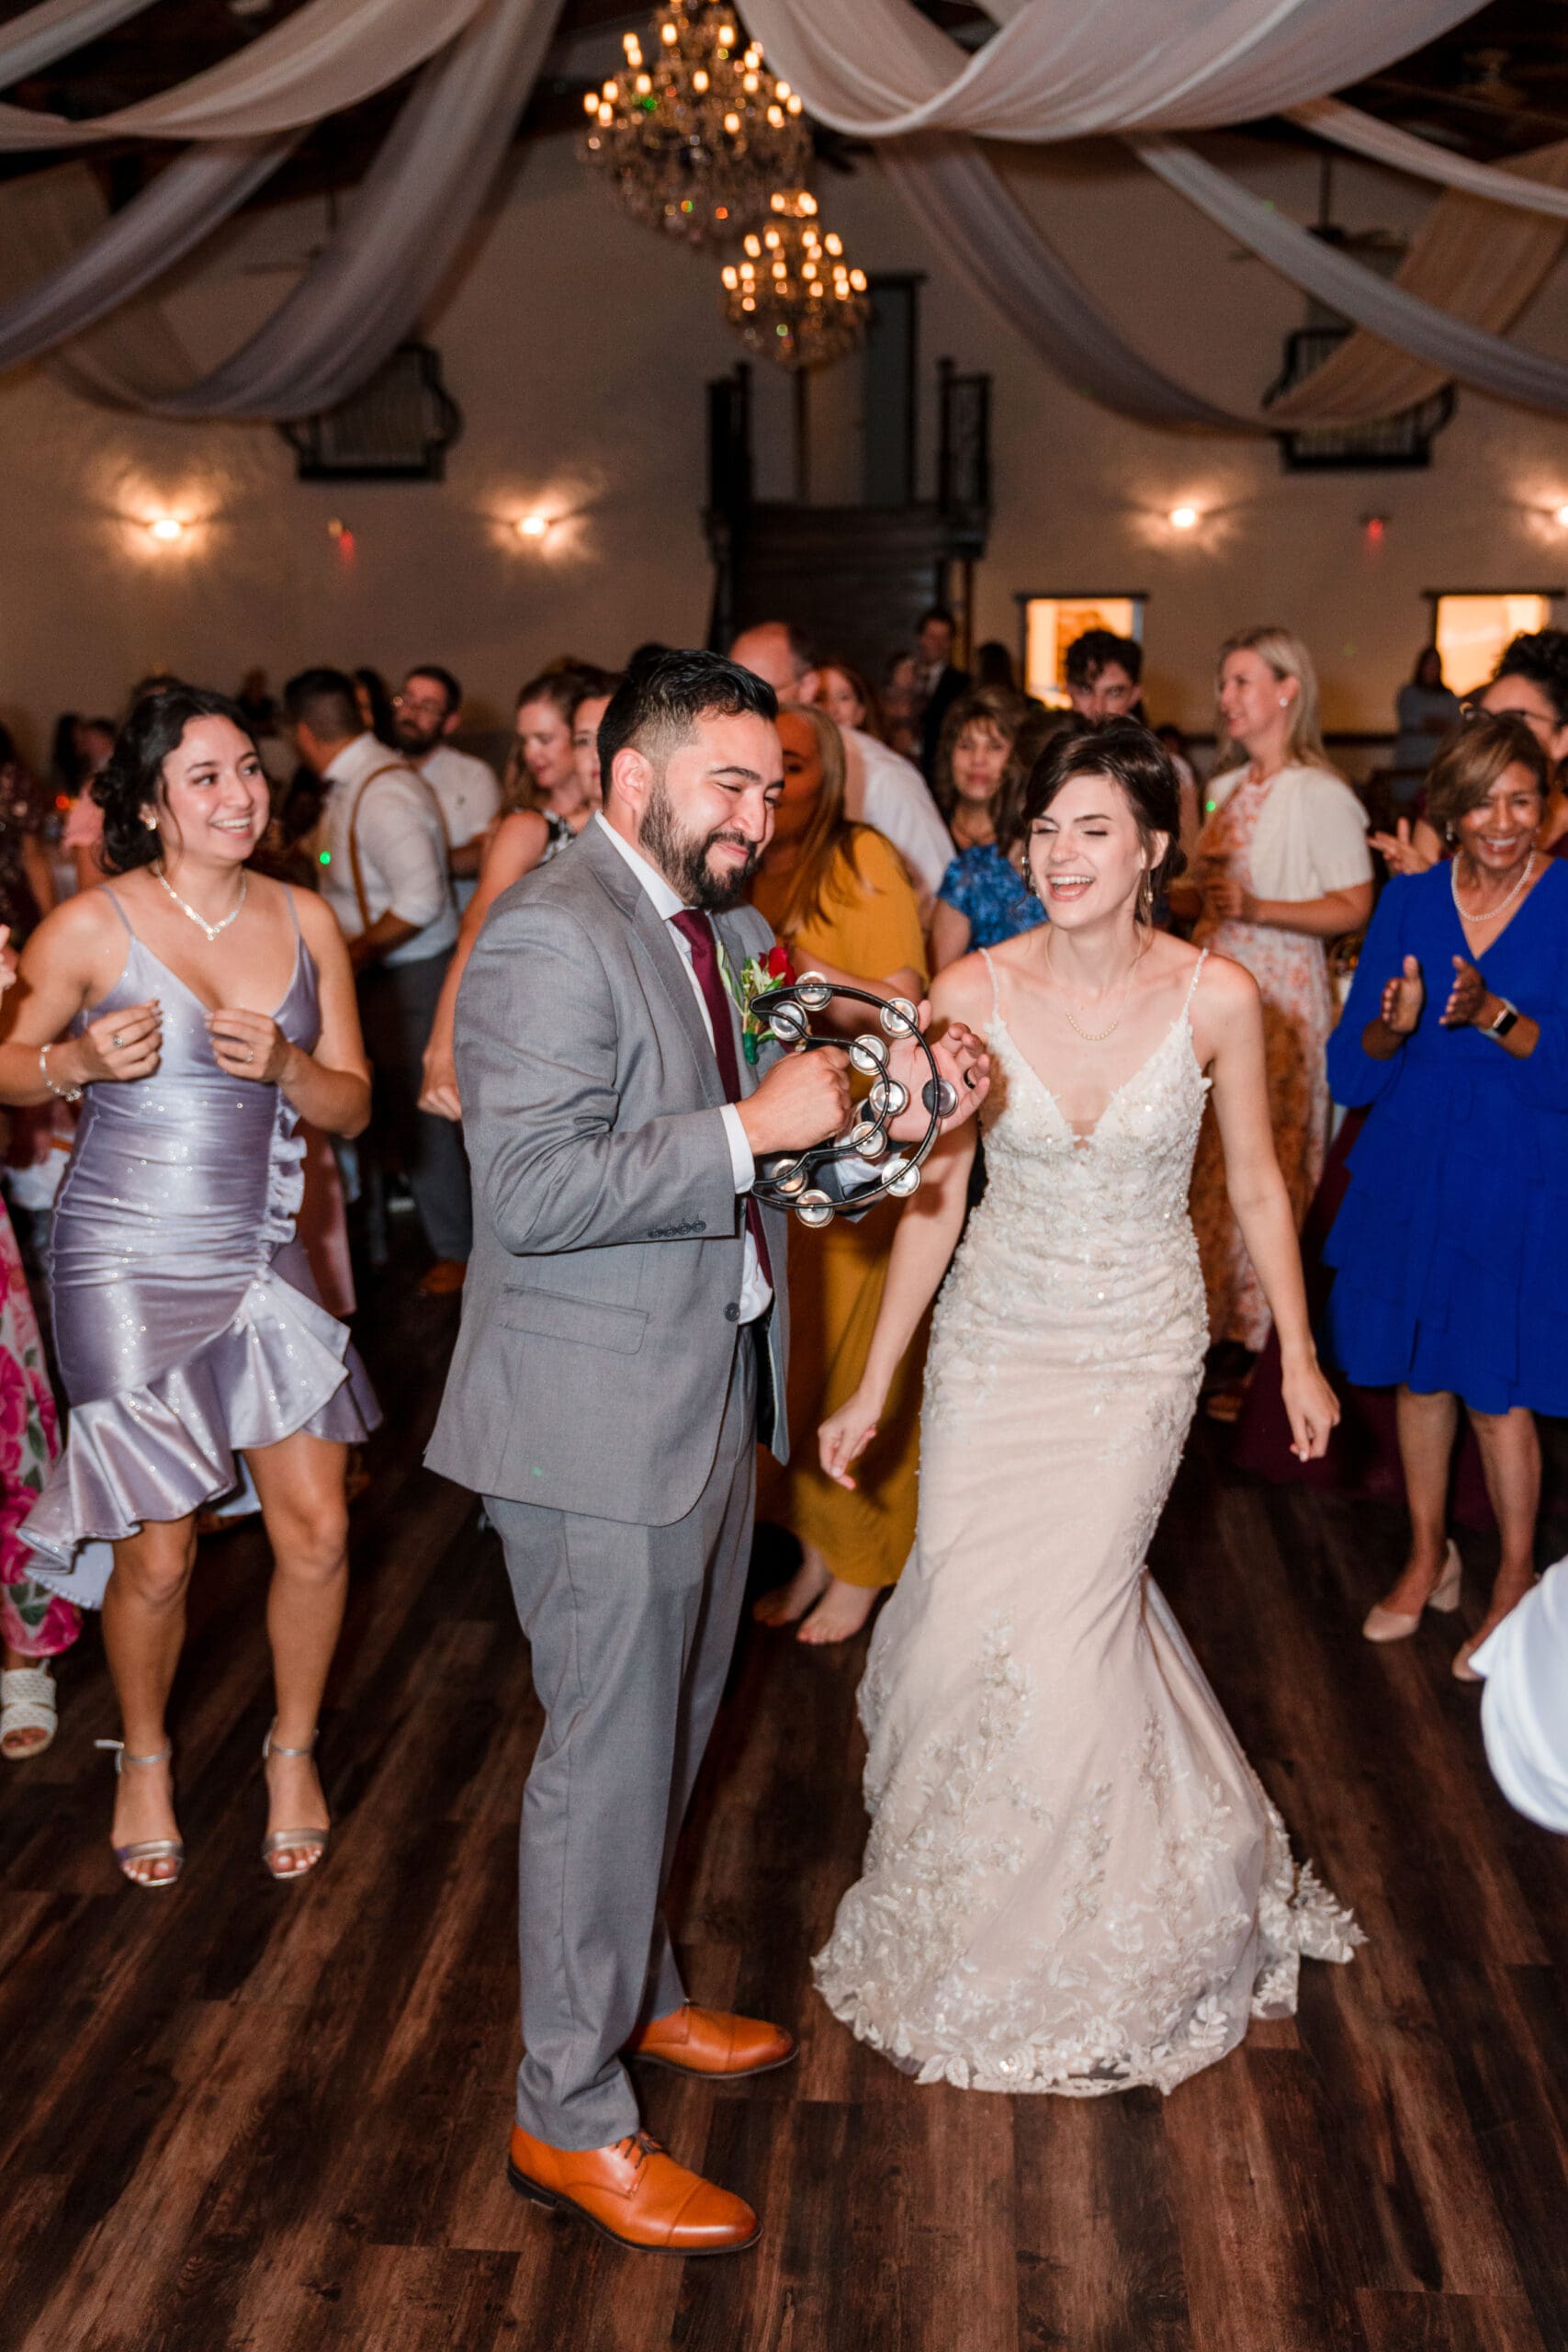 Jonah joyfully shaking a handbell on the dance floor with his new bride Bethany by his side, both immersed in the lively atmosphere of the reception at the Sterling Event Venue Reception Center.